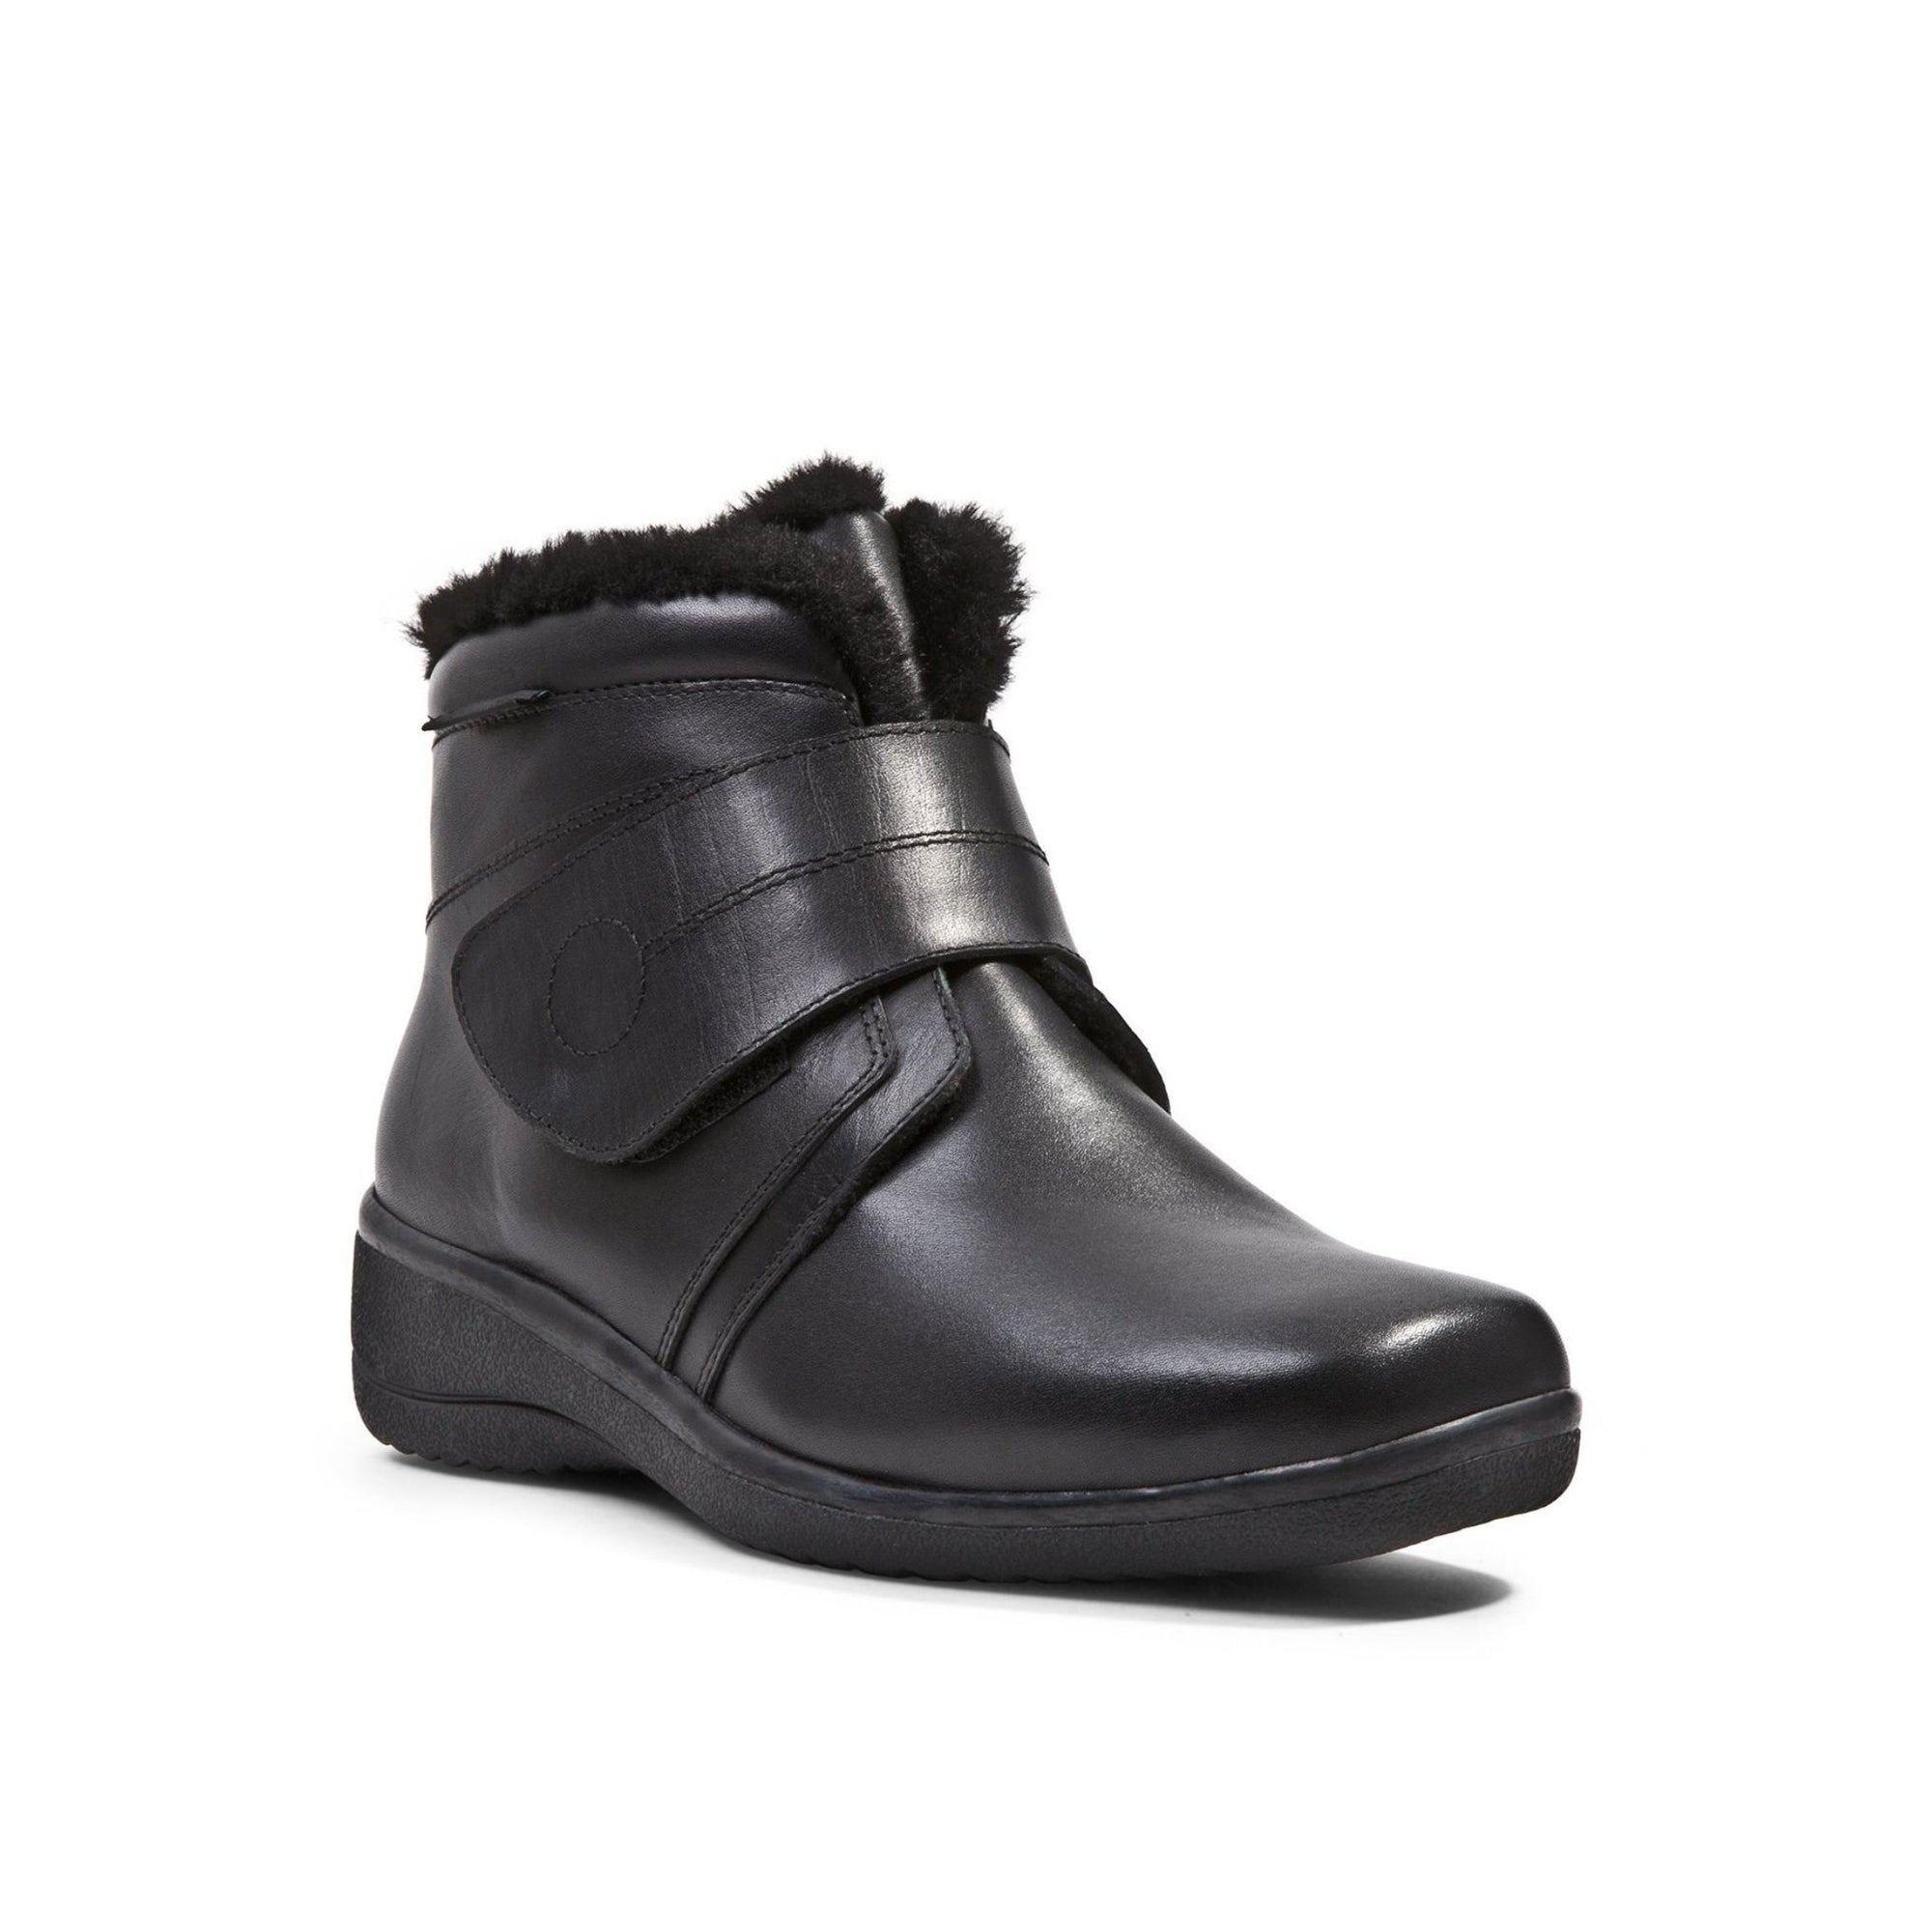 Black leather ankle boot with thick fold over Velcro strap and black faux fur trim. 